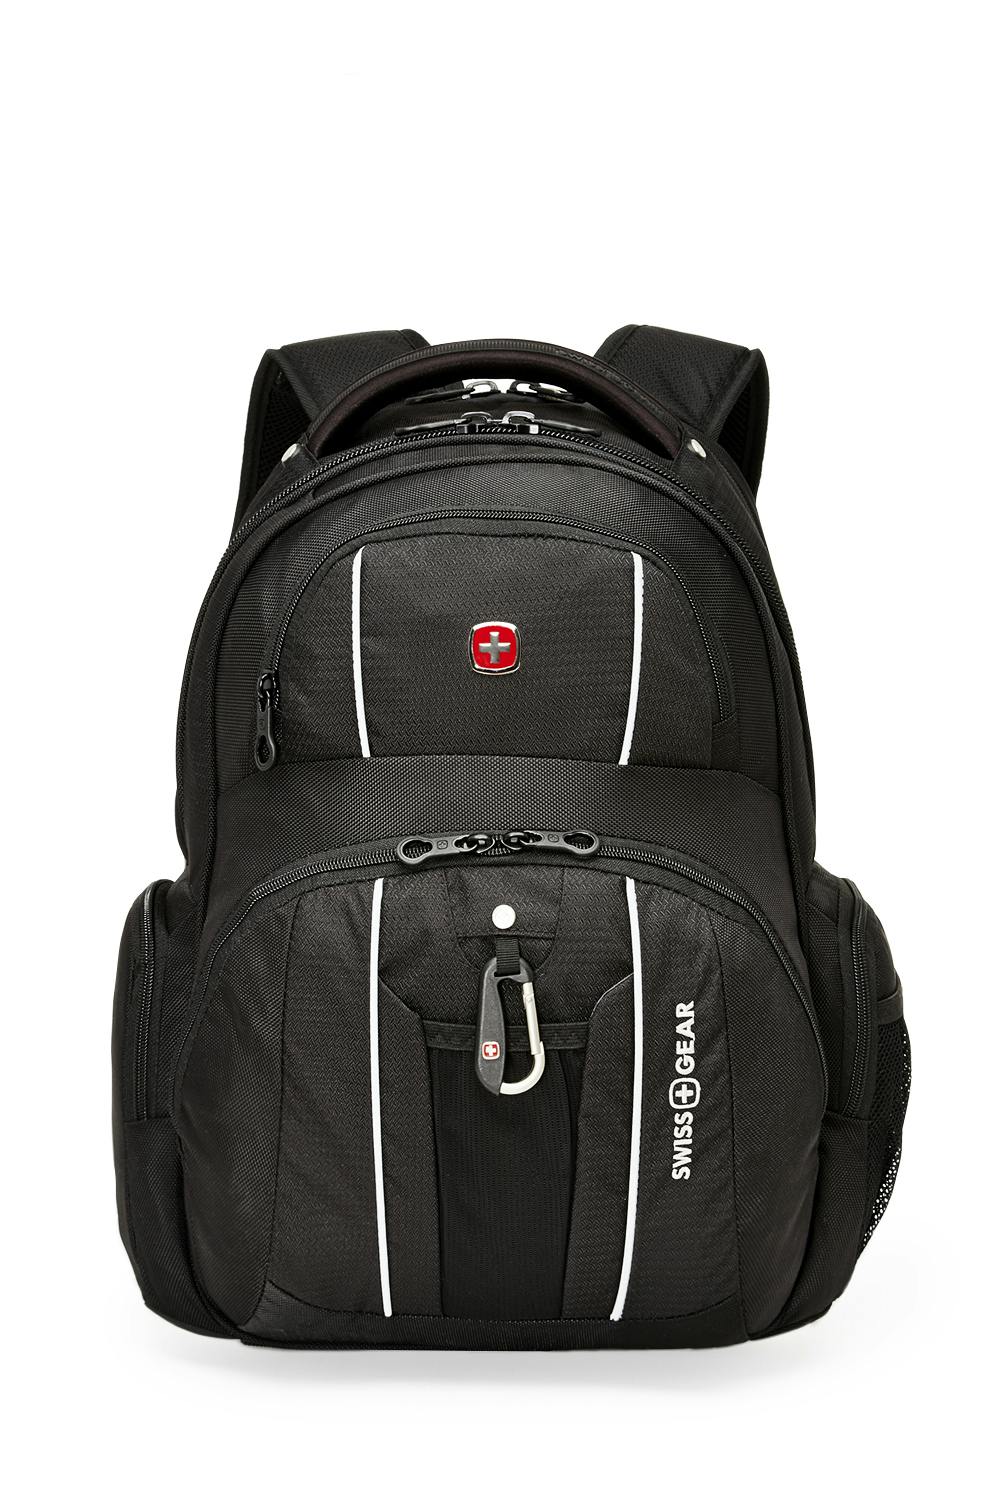 one strap backpack products for sale